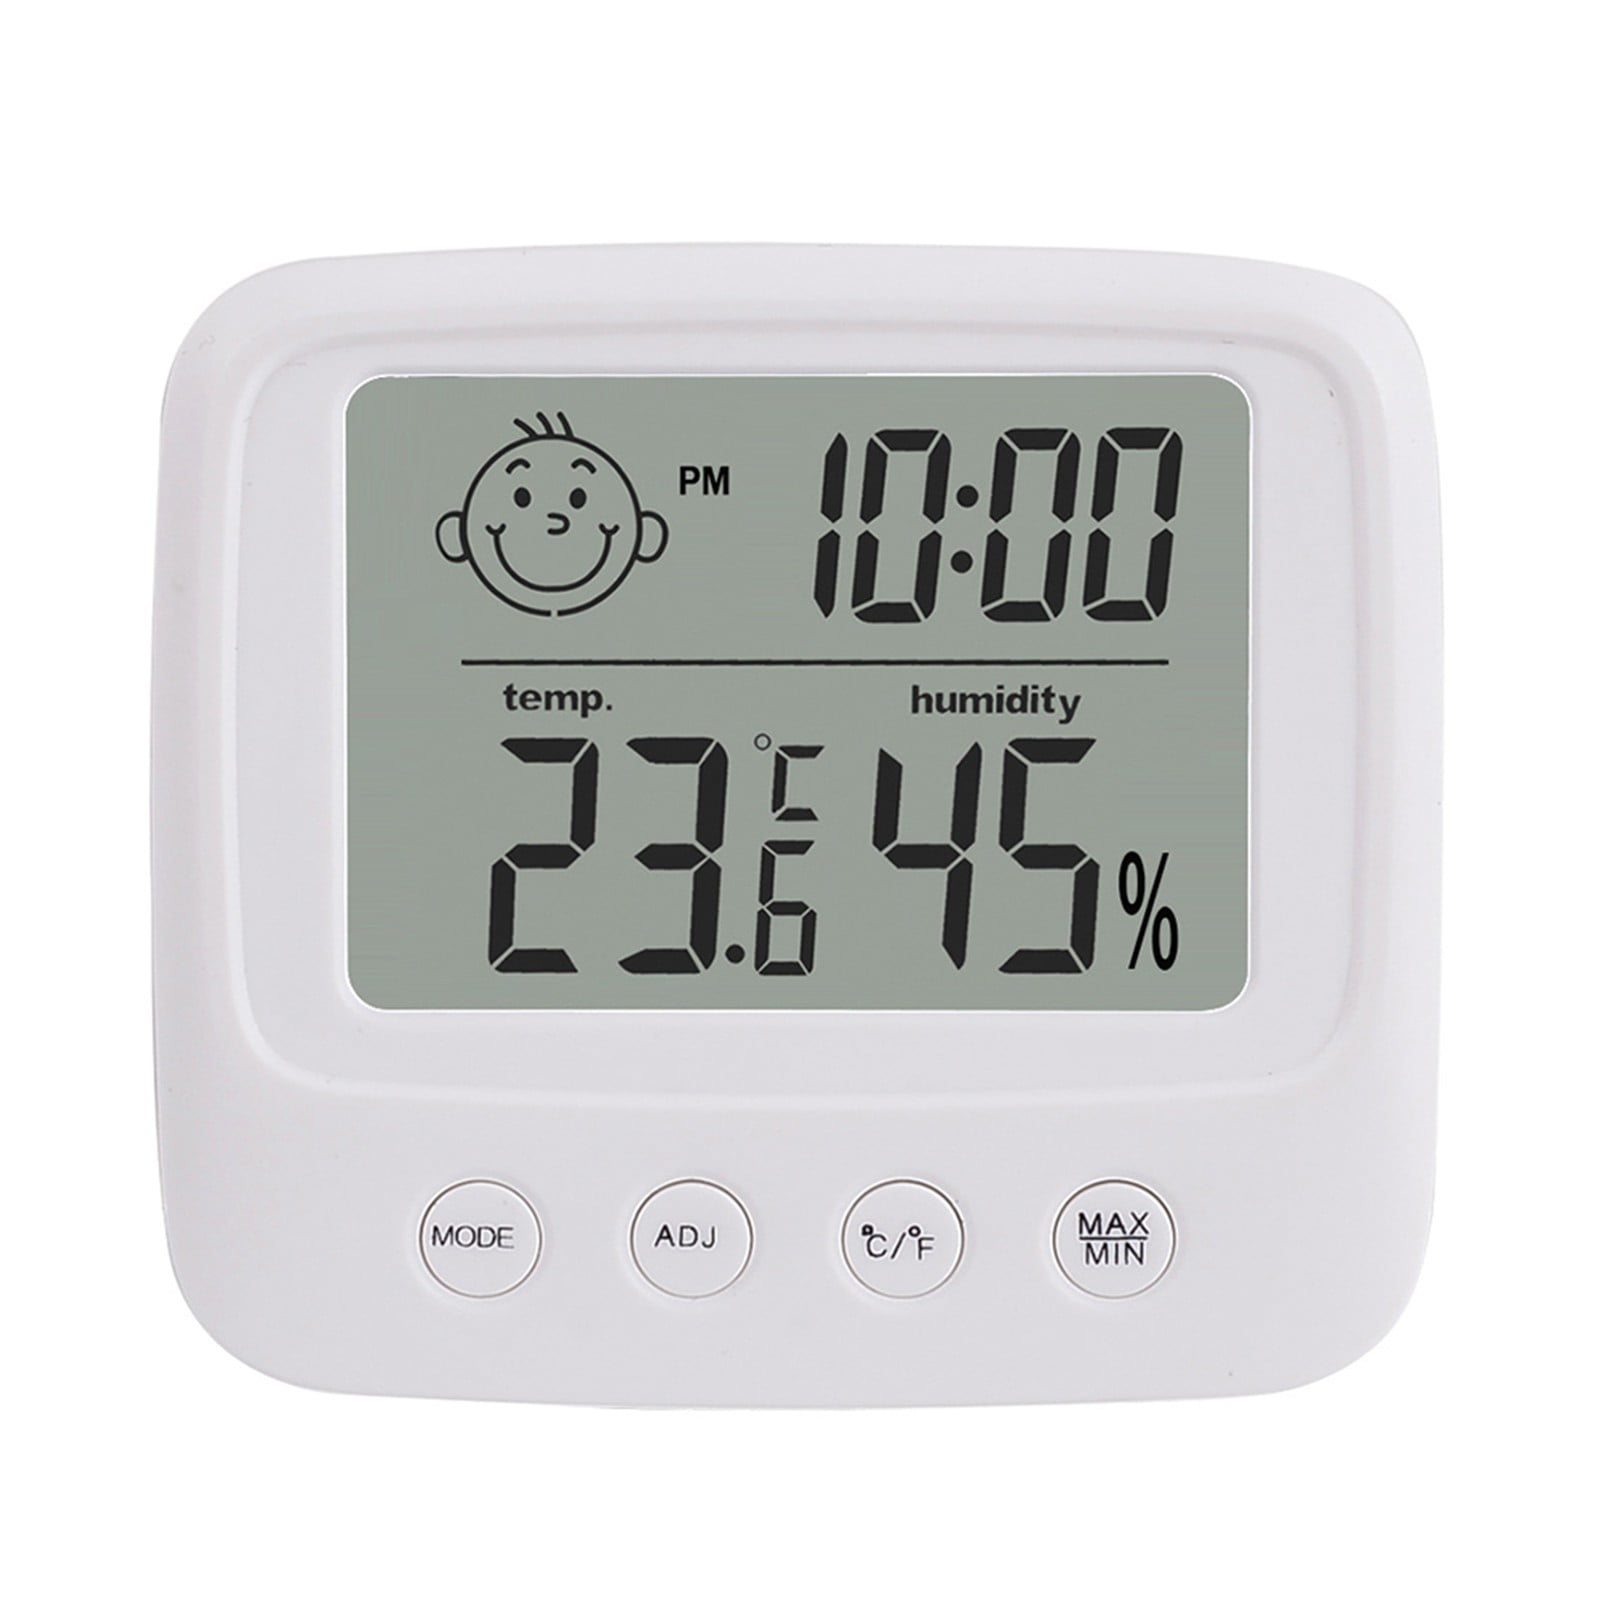 Indoor Thermometer Mini, Humidity Gauge Meter Digital Hygrometer Room  Thermometer, ZigBee High Accurate Temperature Humidity Sensor for Home,  Portable